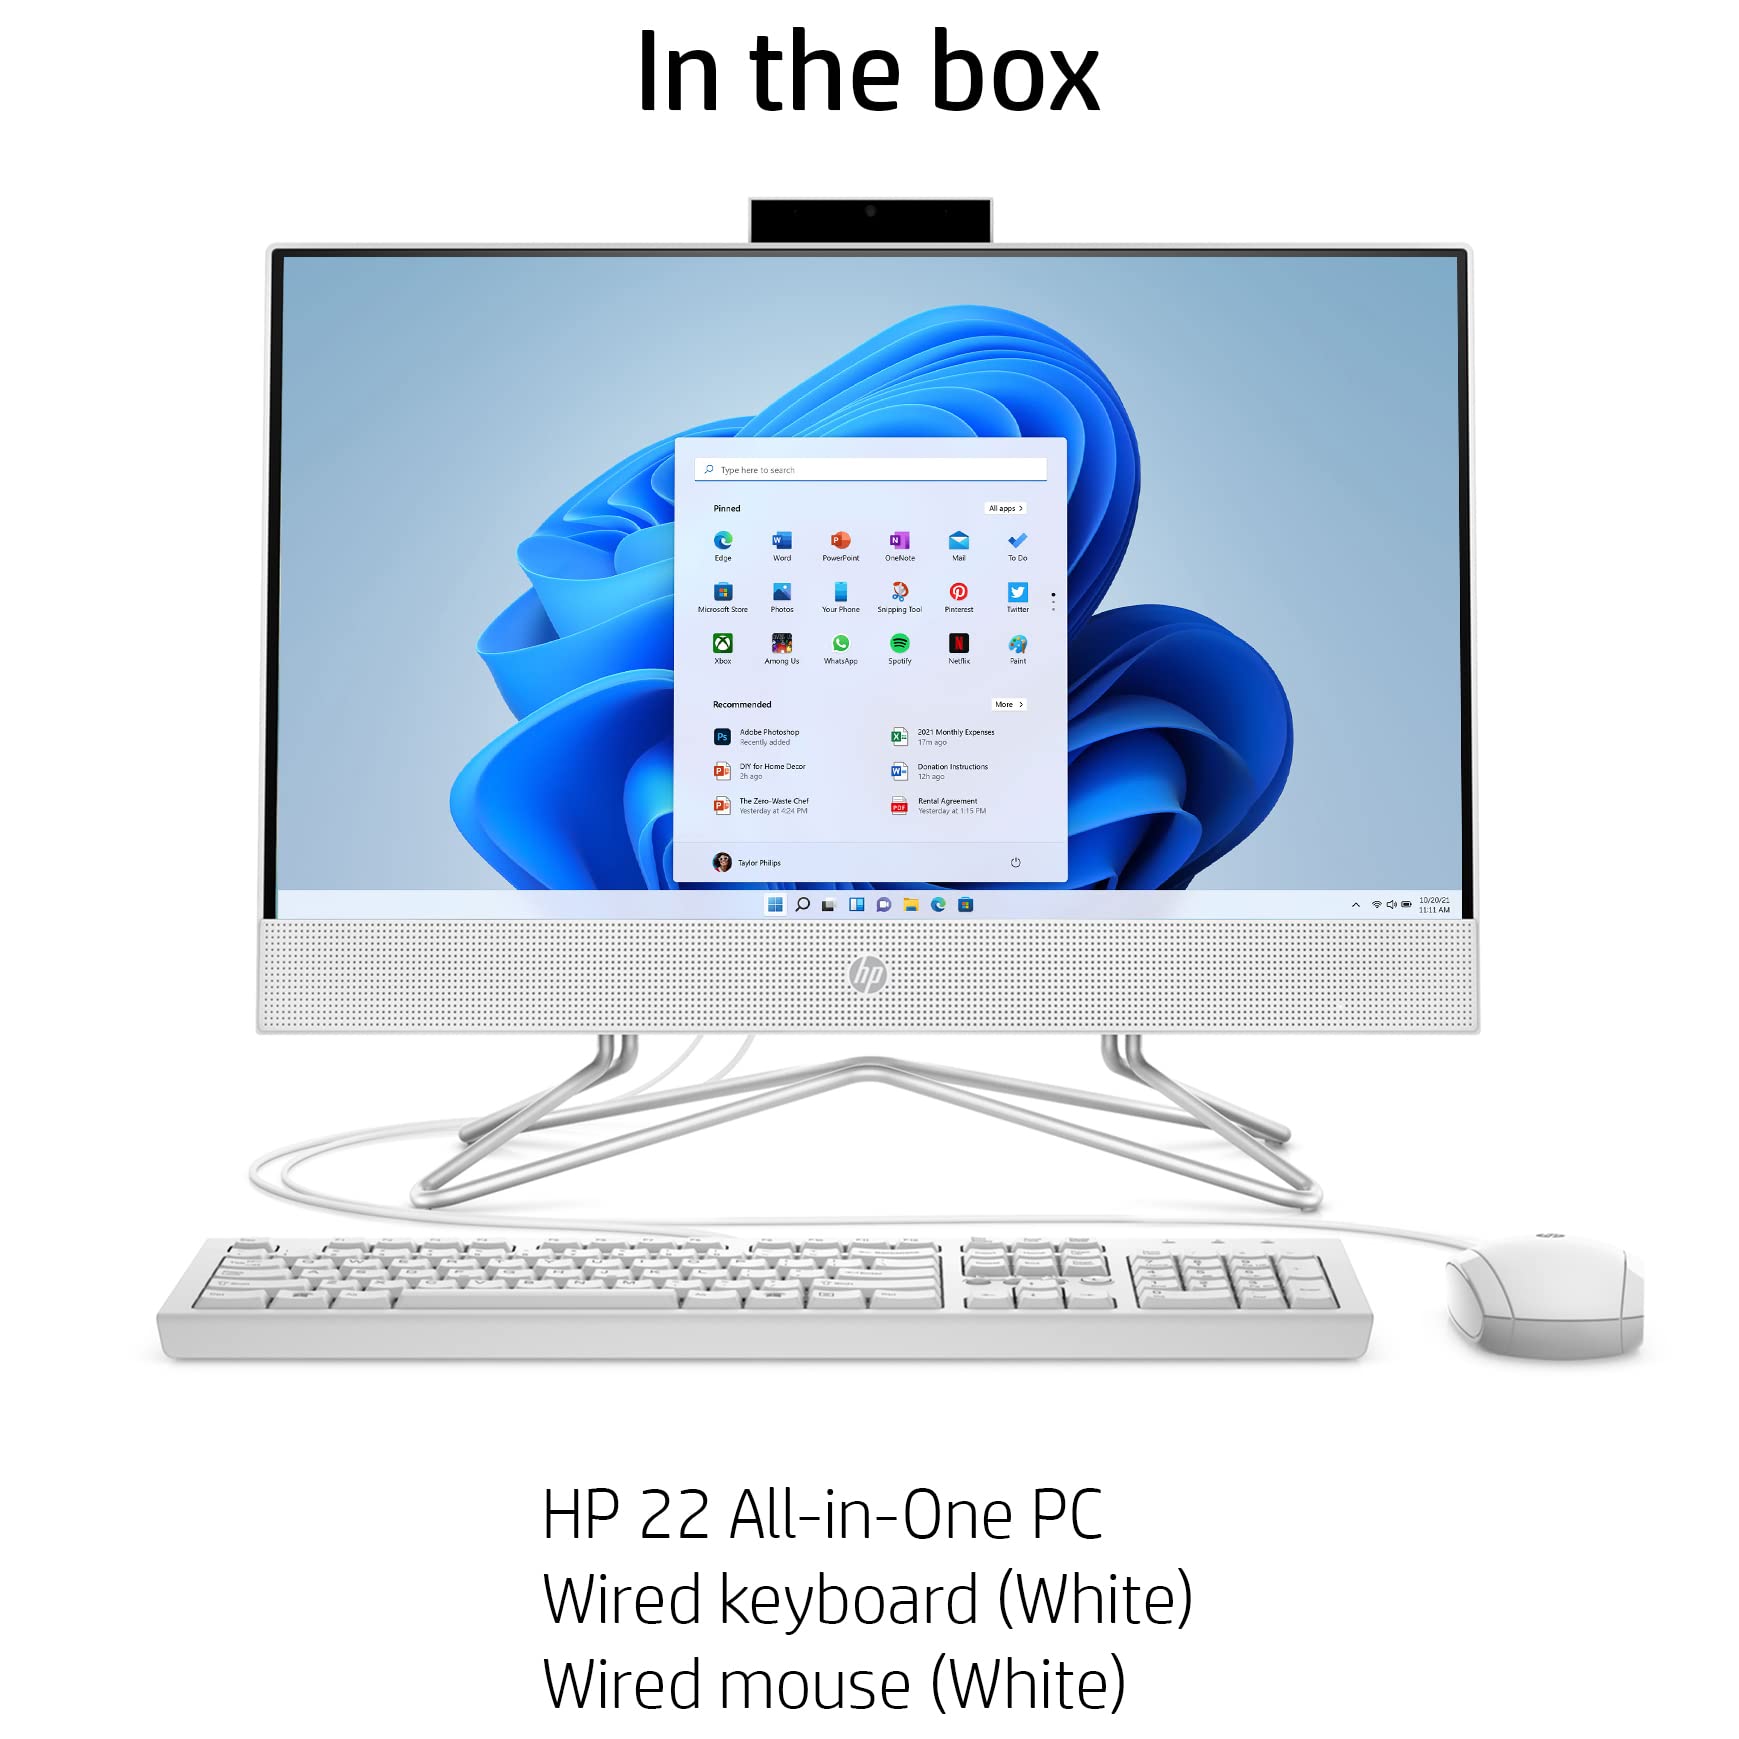 HP 22 AIO 21.5" FHD Business All-in-One Desktop Computer, Intel Celeron J4025 Up to 2.9GHz, 8GB DDR4 RAM, 512GB PCIe SSD, WiFi, Bluetooth, Keyboard and Mouse, Windows 11 Pro